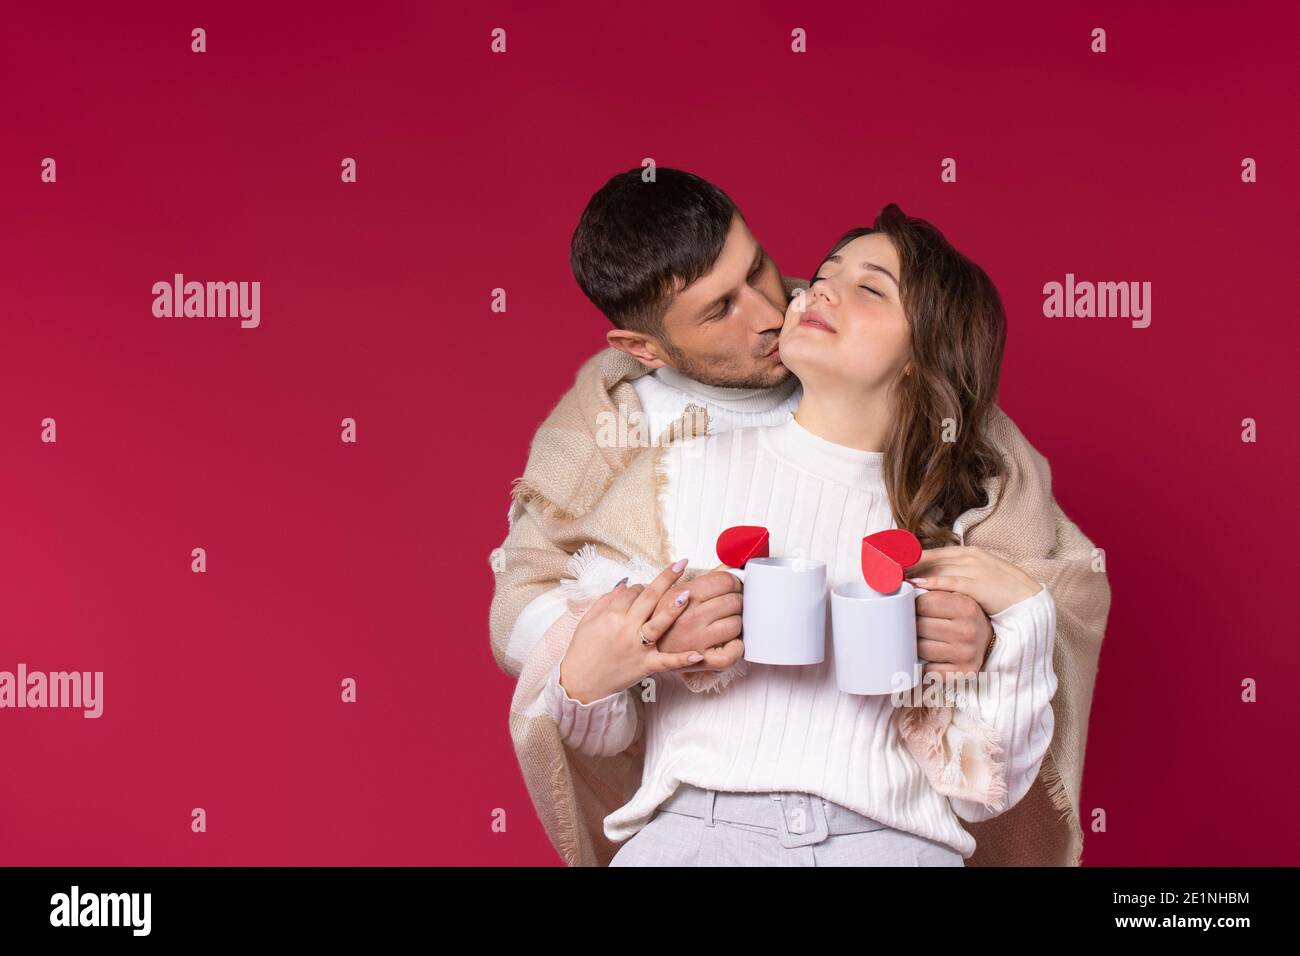 Hot Kiss High Resolution Stock Photography And Images Alamy Use them in commercial designs under lifetime, perpetual & worldwide rights. https www alamy com a loving couple wrapped in a warm blanket holds hot tea cups have a lovely time red background st valentines day image396927768 html